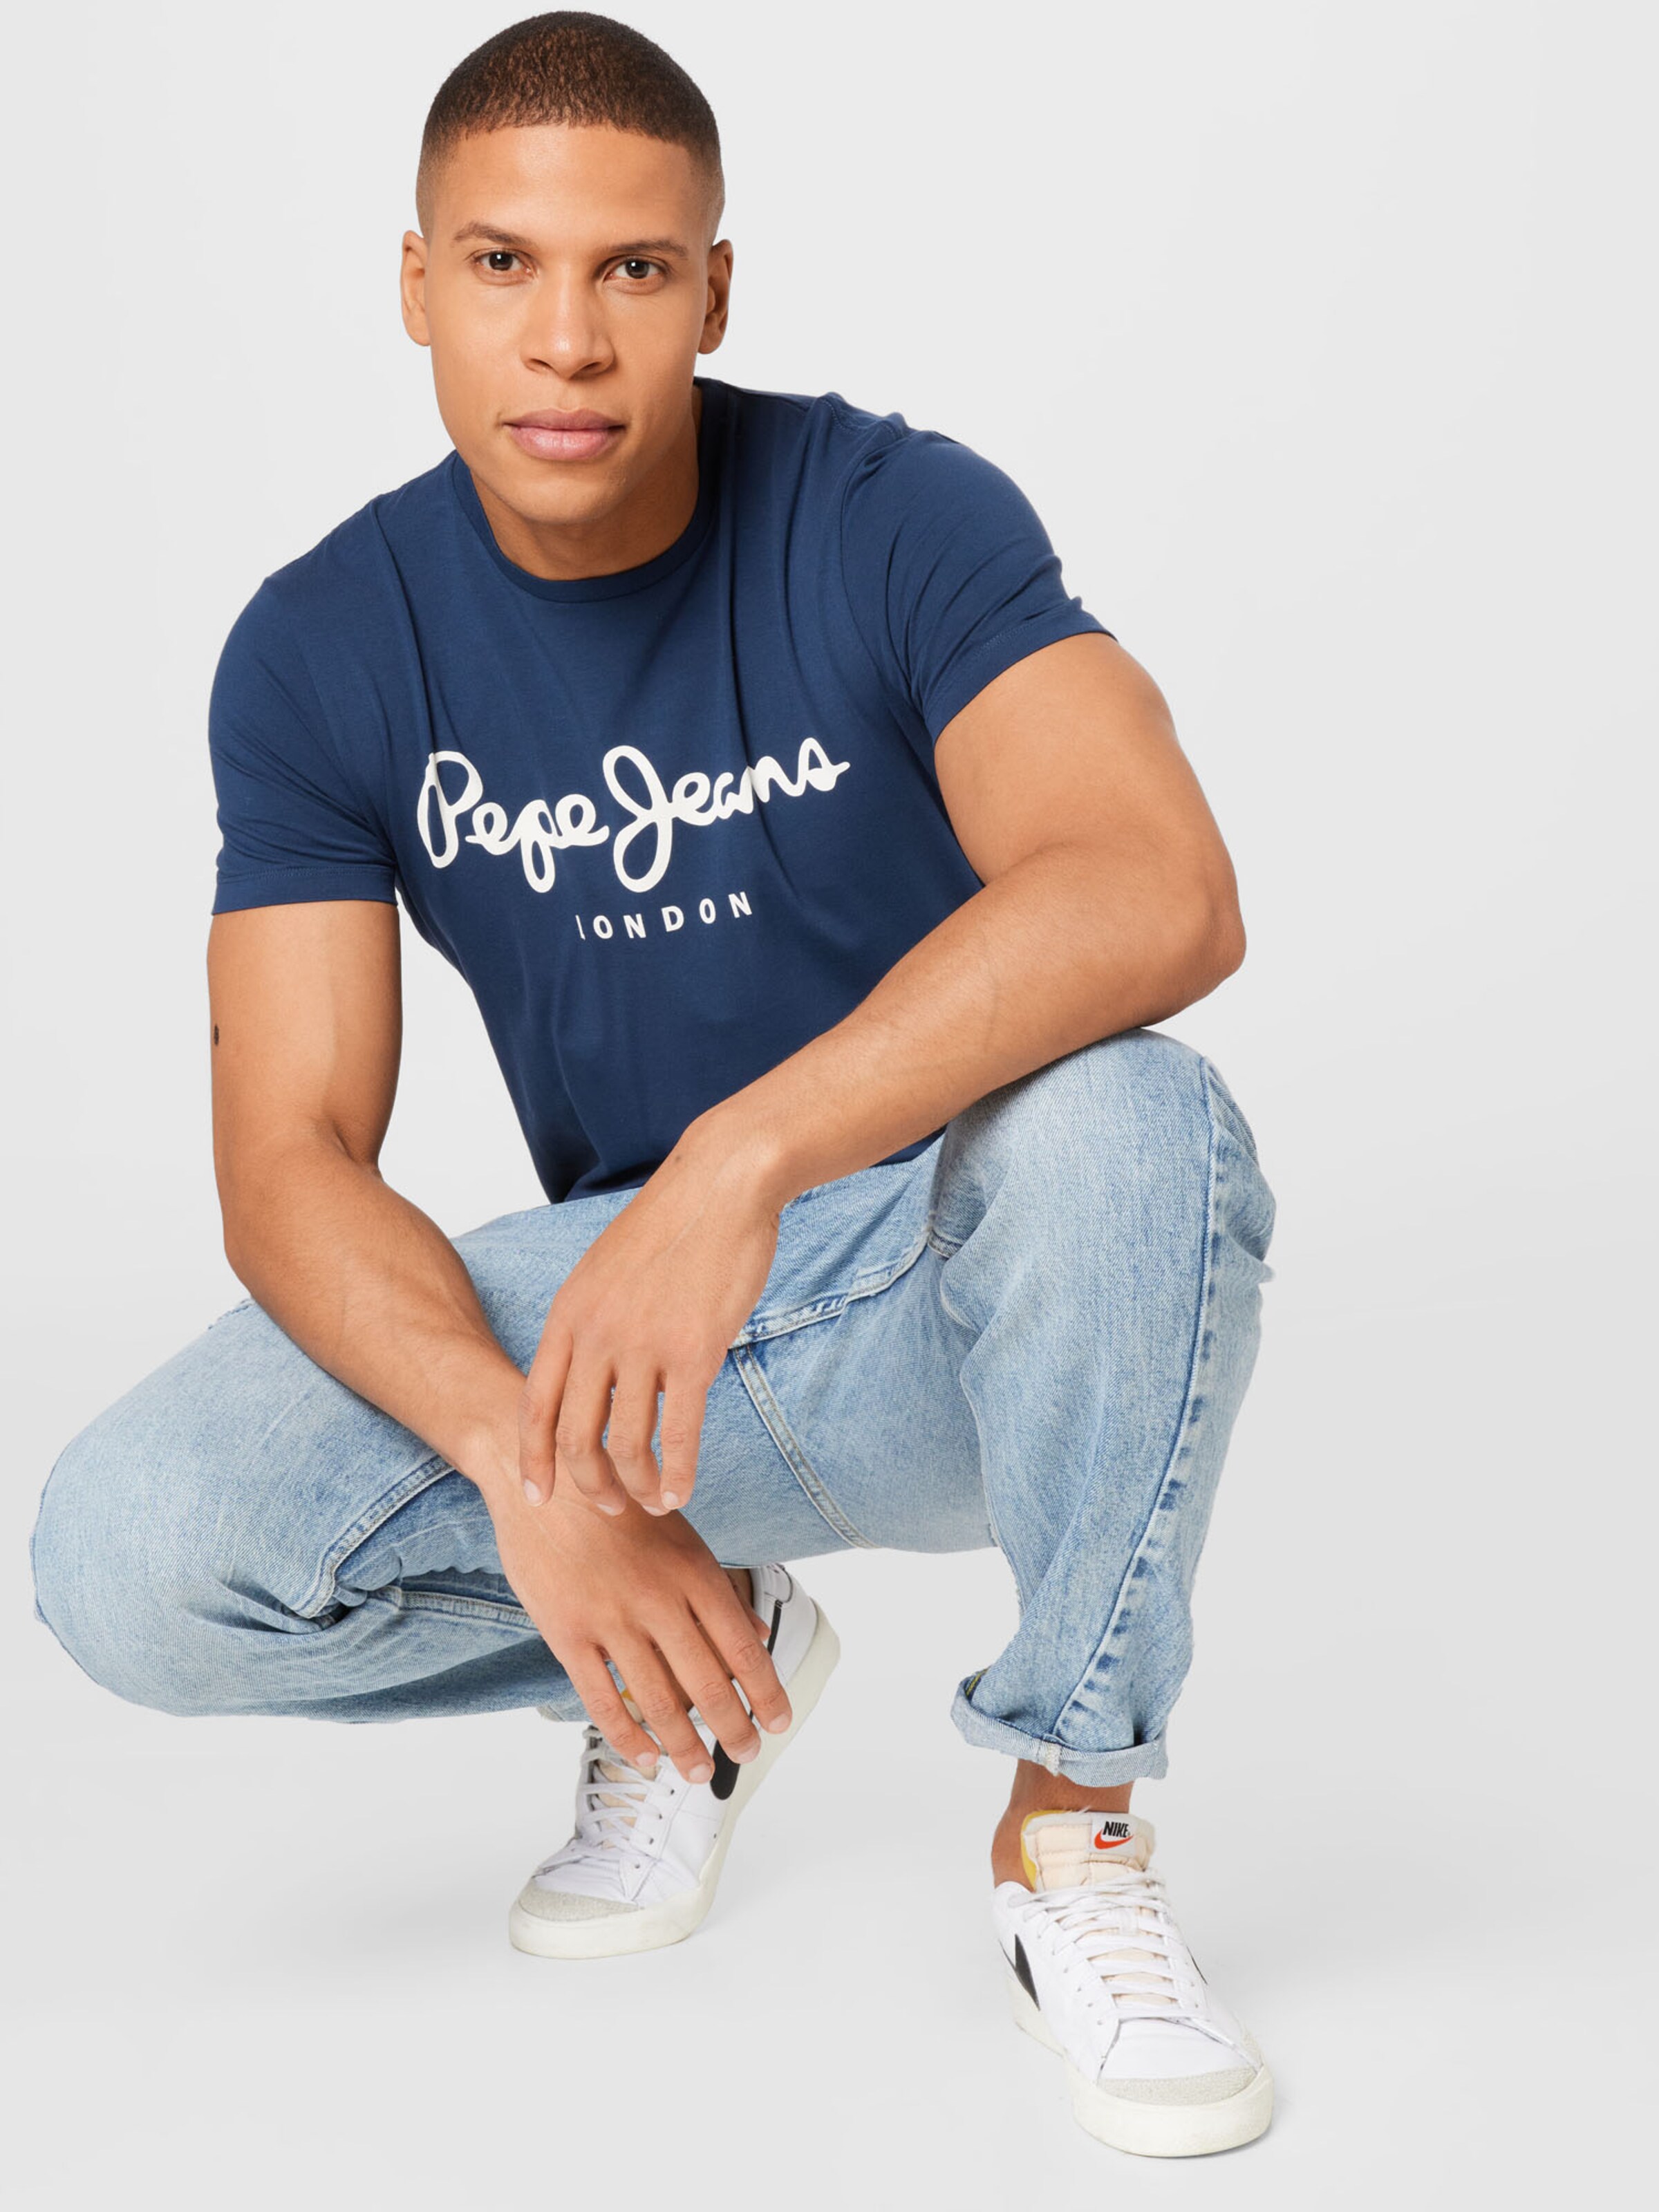 Logo print cotton t-shirt with short sleeves, grey, Pepe Jeans | La Redoute